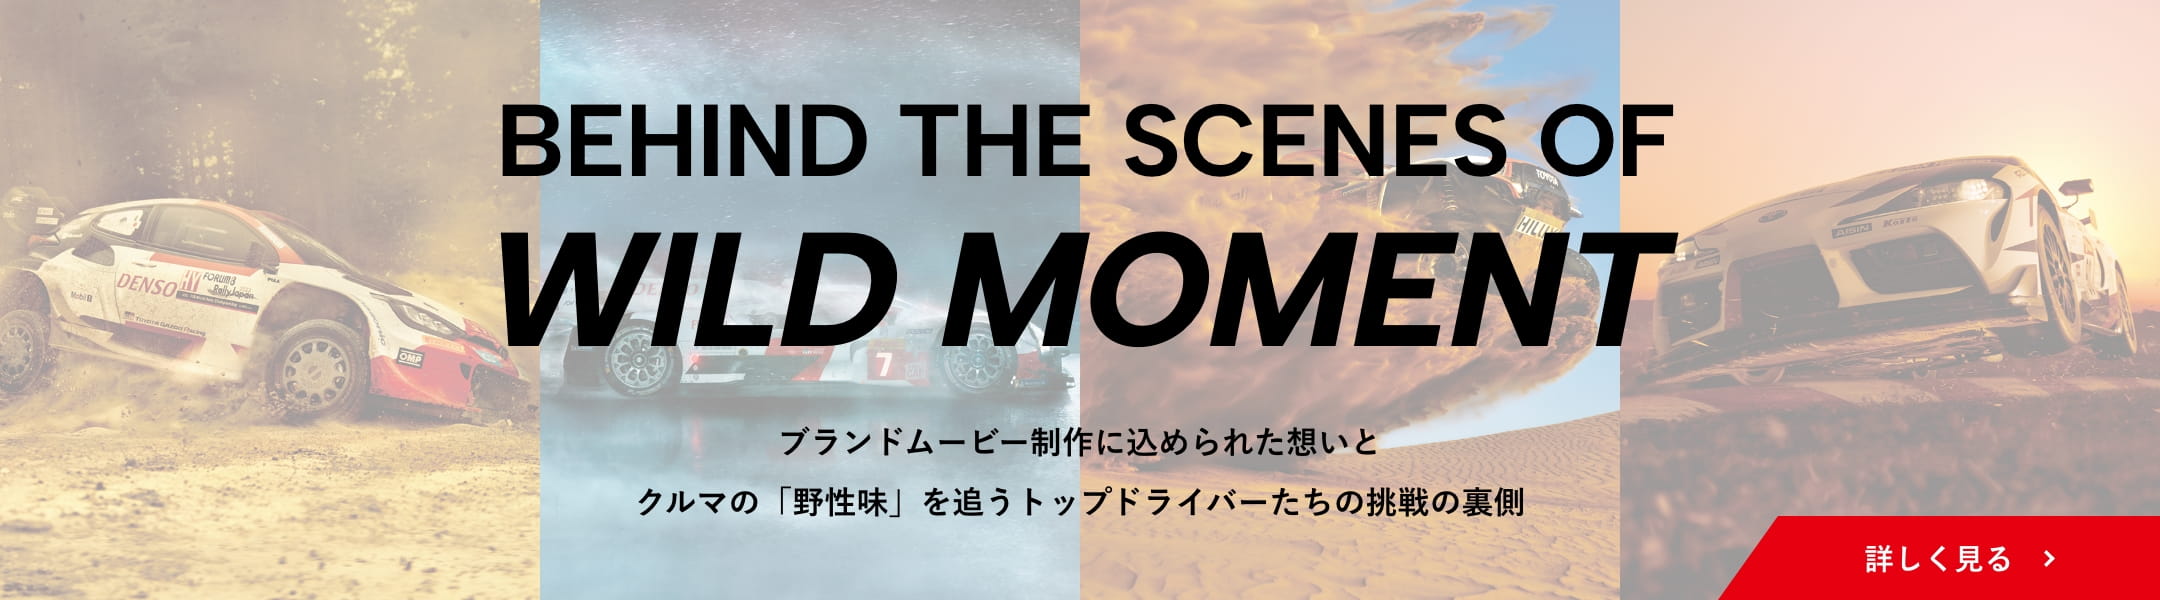 BEHIND THE SCENES OF WILD MOMENT